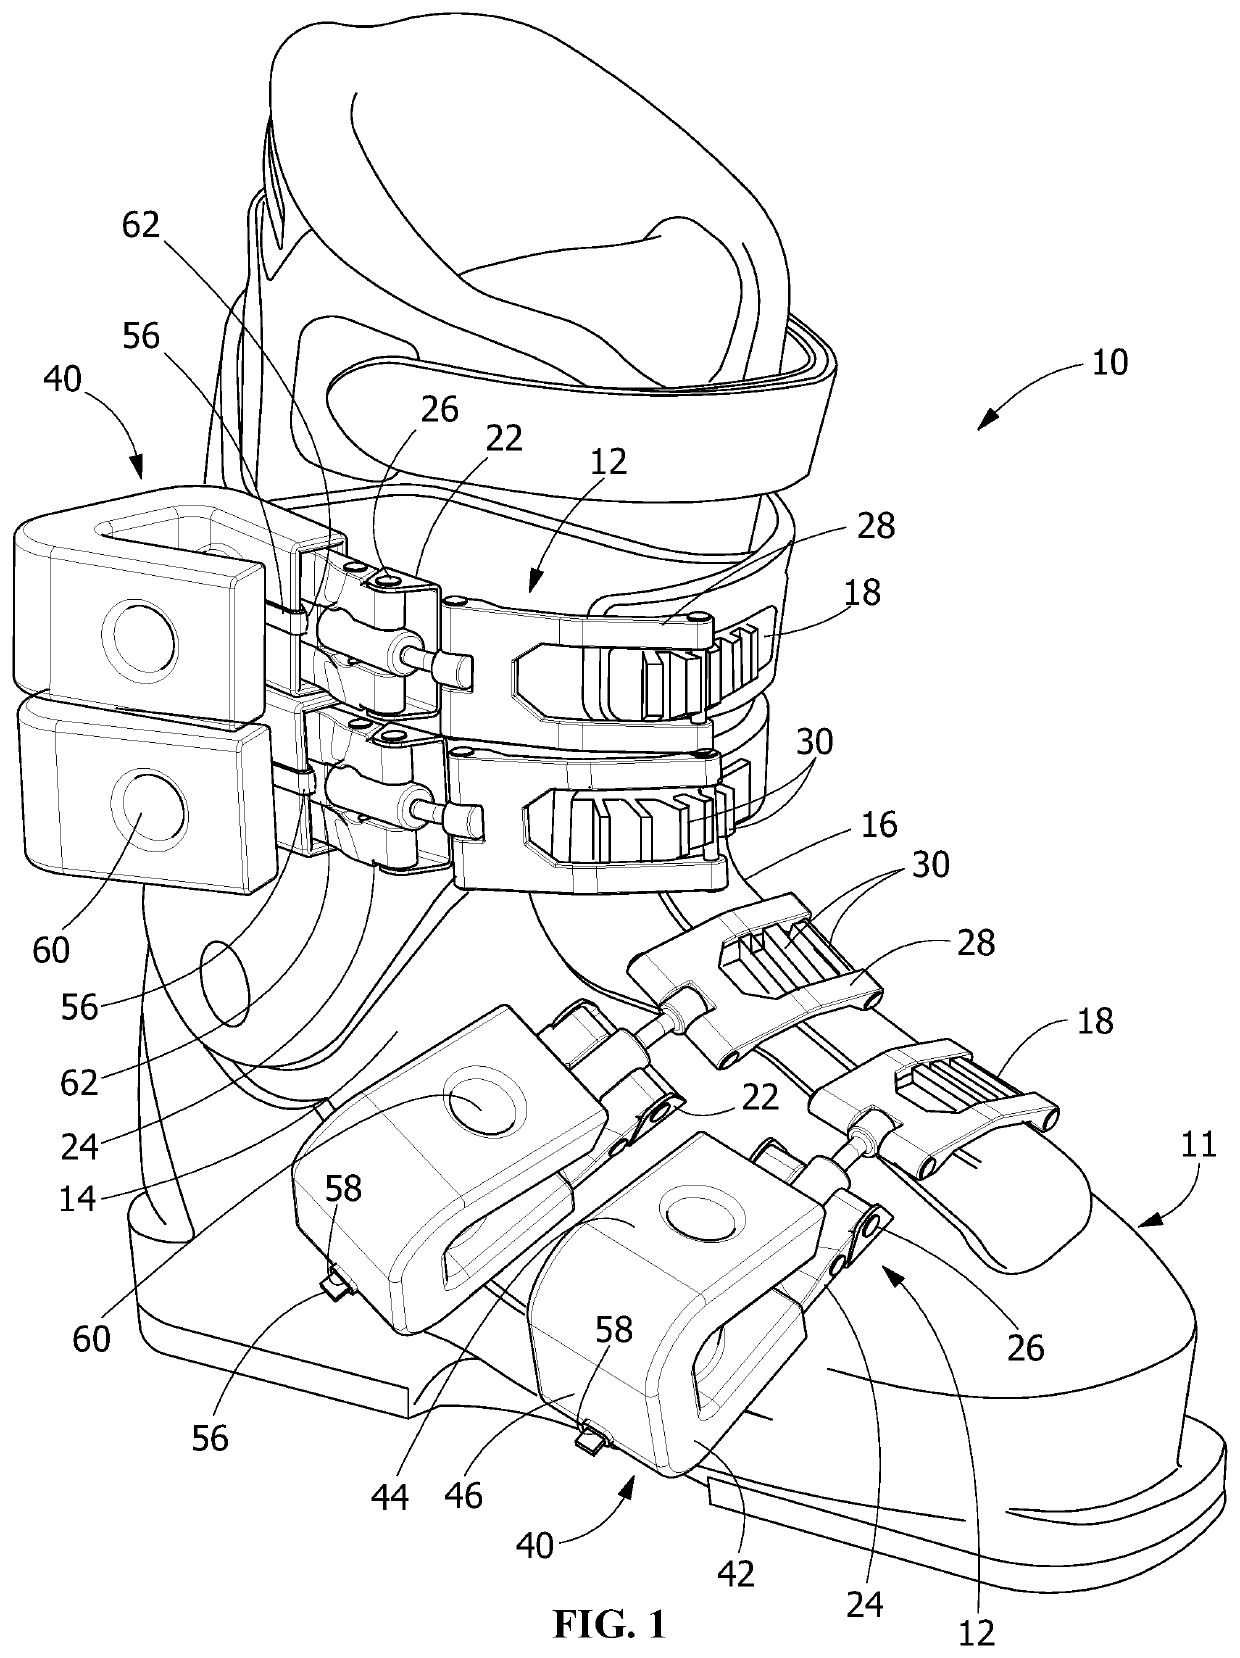 Device and method to facilitate the opening and closing and closing of a ski boot